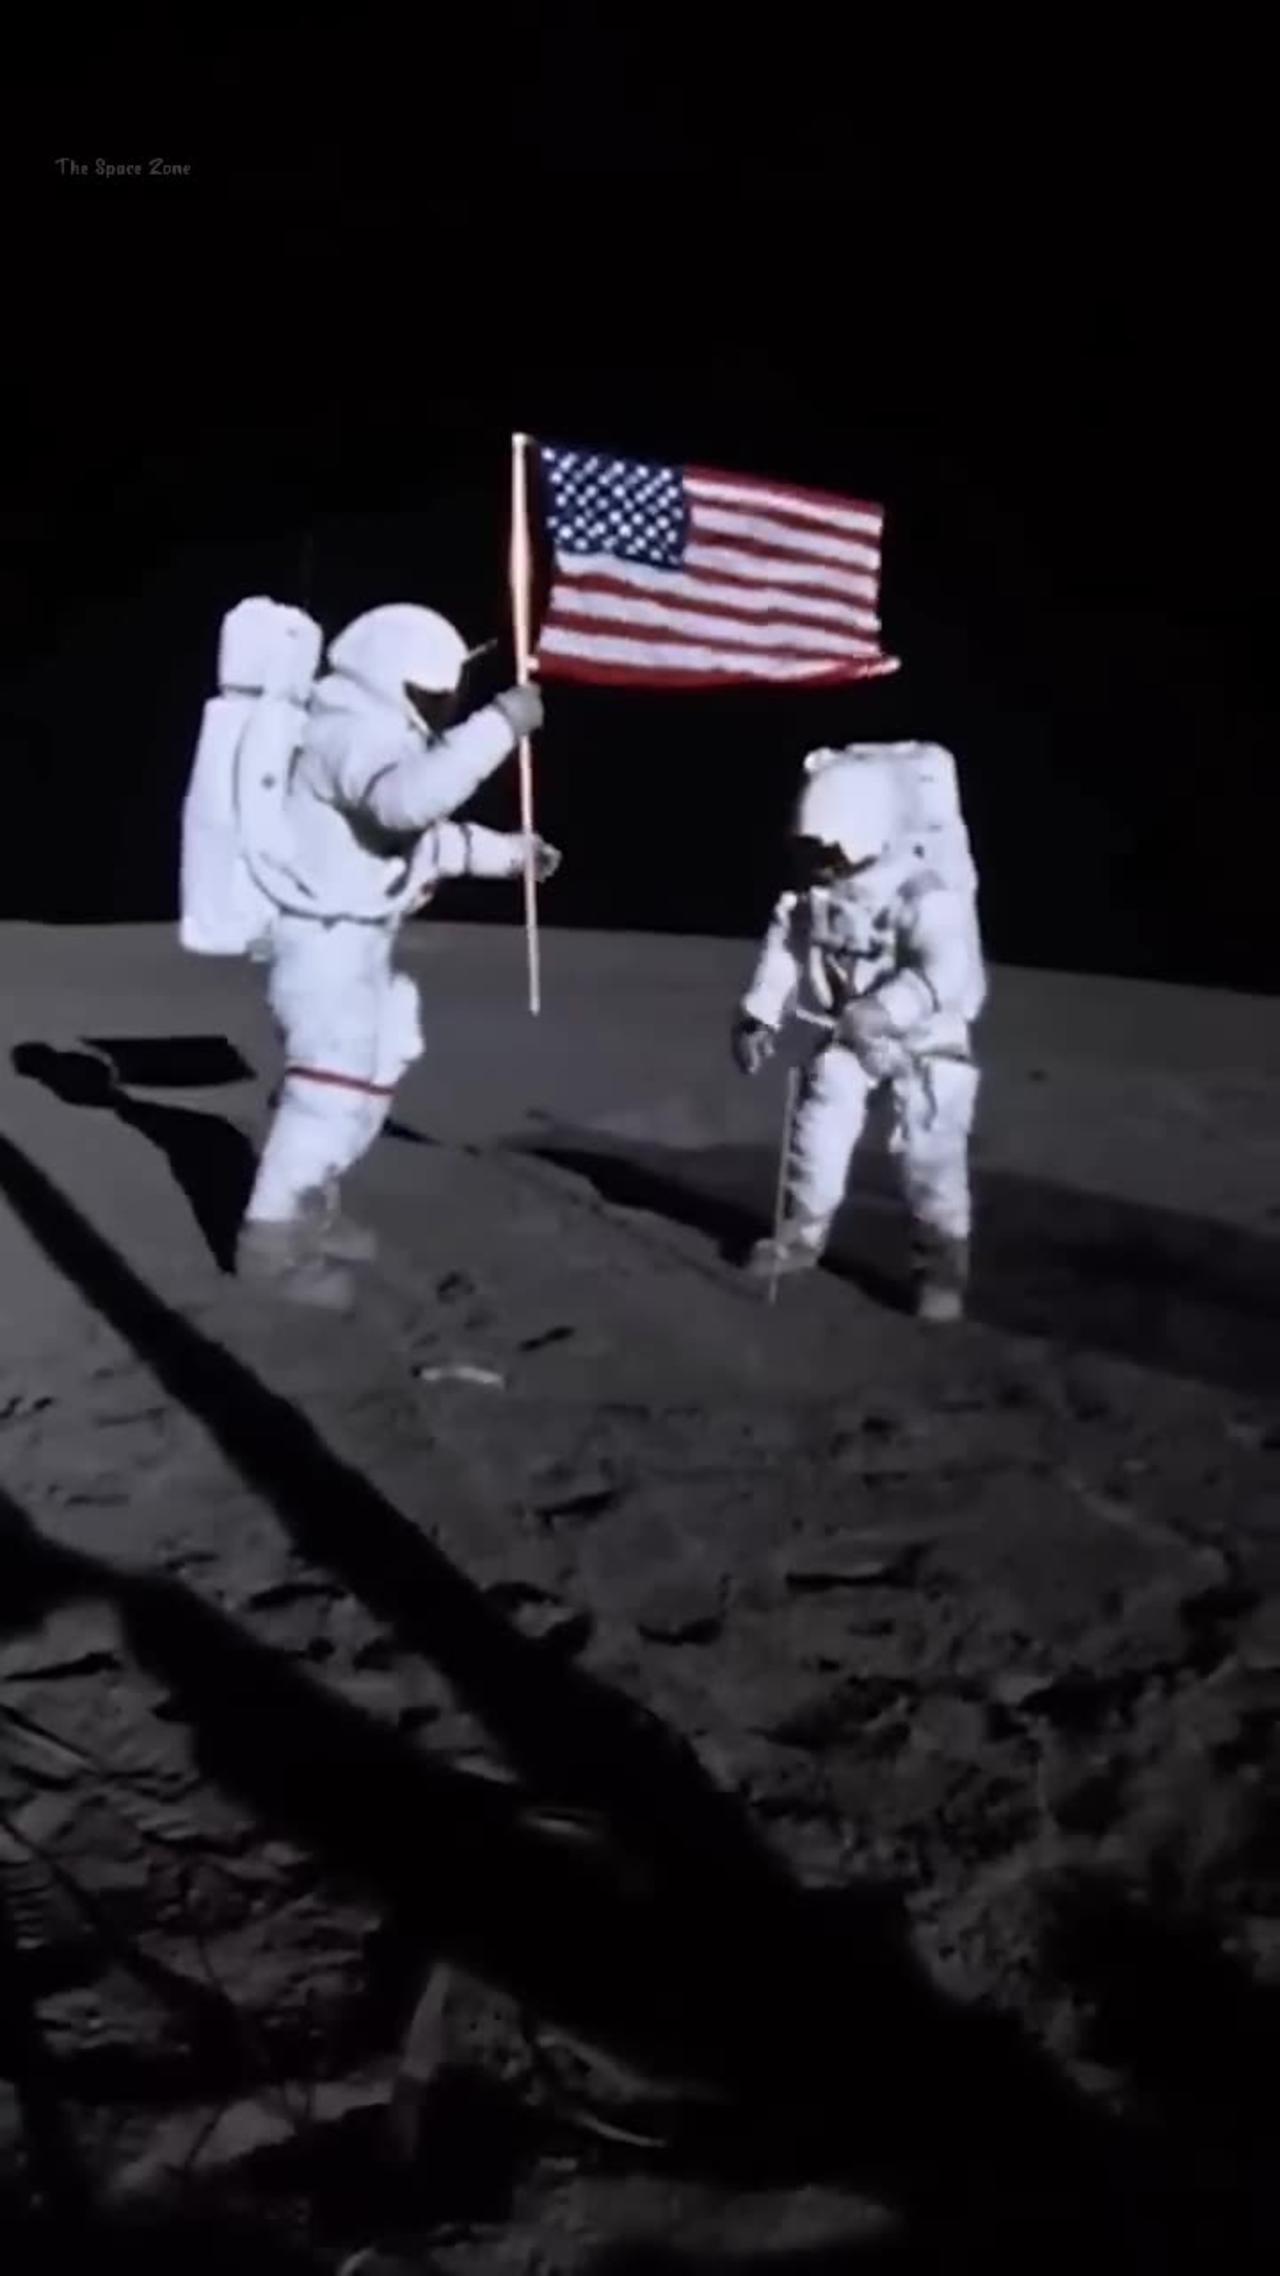 Neil Armstrong's Moon landing video  😍🔥 #shorts #short #viral #viralvideo #thespacezone